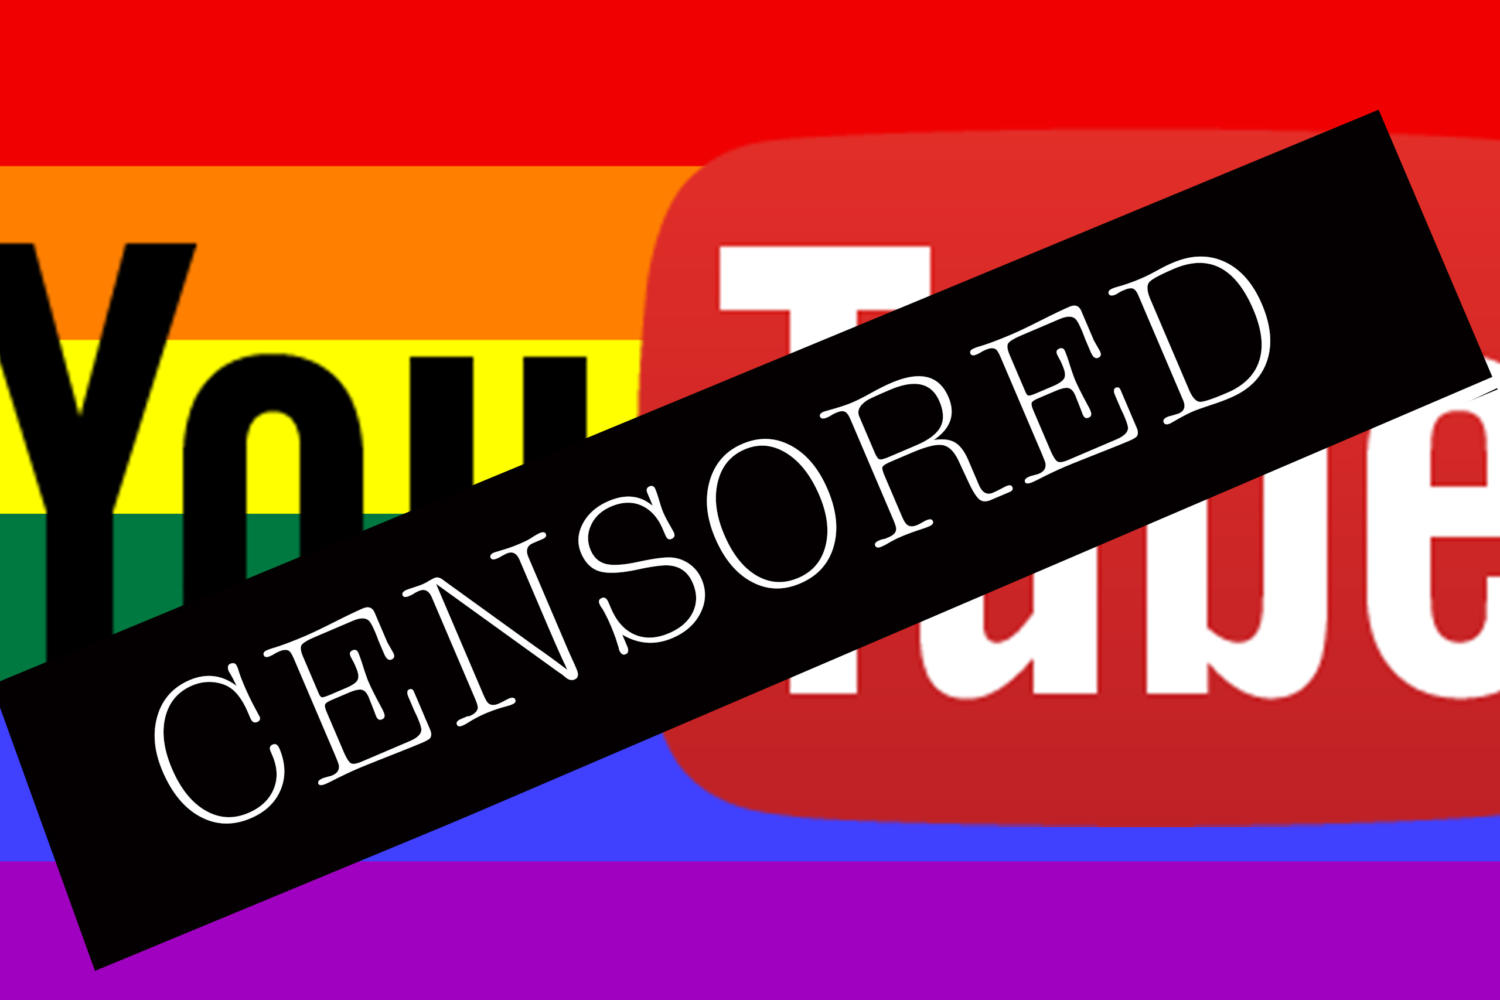 YouTube’s Restrictions on LGBT Content Have Severe Consequences